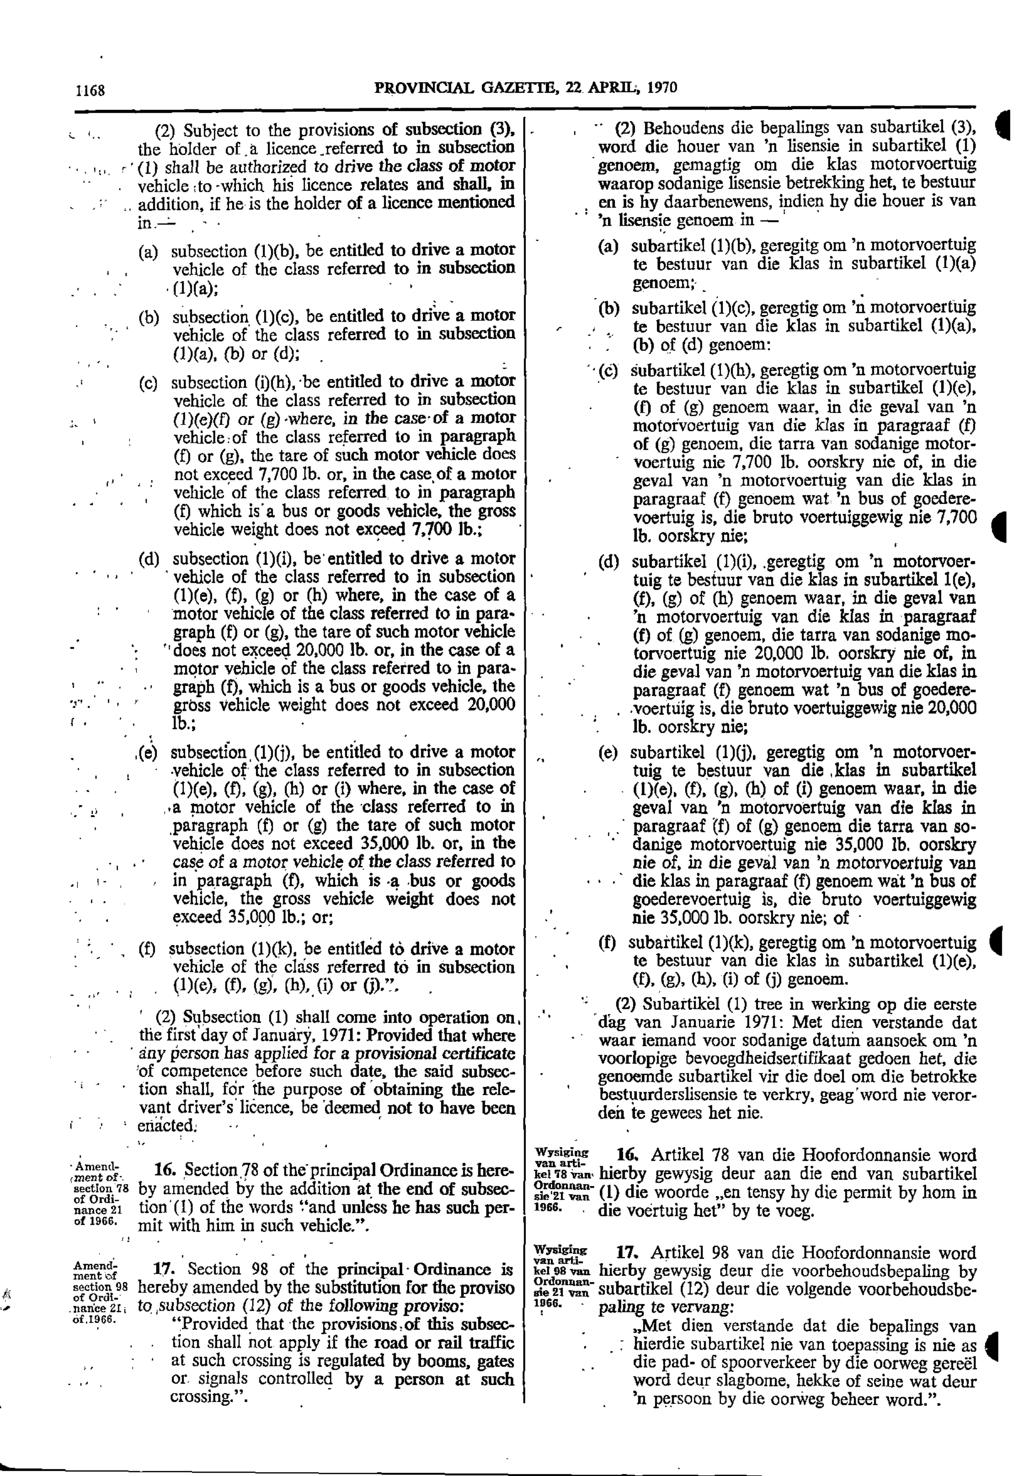 s 1168 PROVINCIAL GAZETTE 22 APRIL 1970 i : " (2) Subject to the provisions of subsection (3) (2) Behoudens die bepalings van subartikel (3) 4 the holder of a licence referred to in subsection word